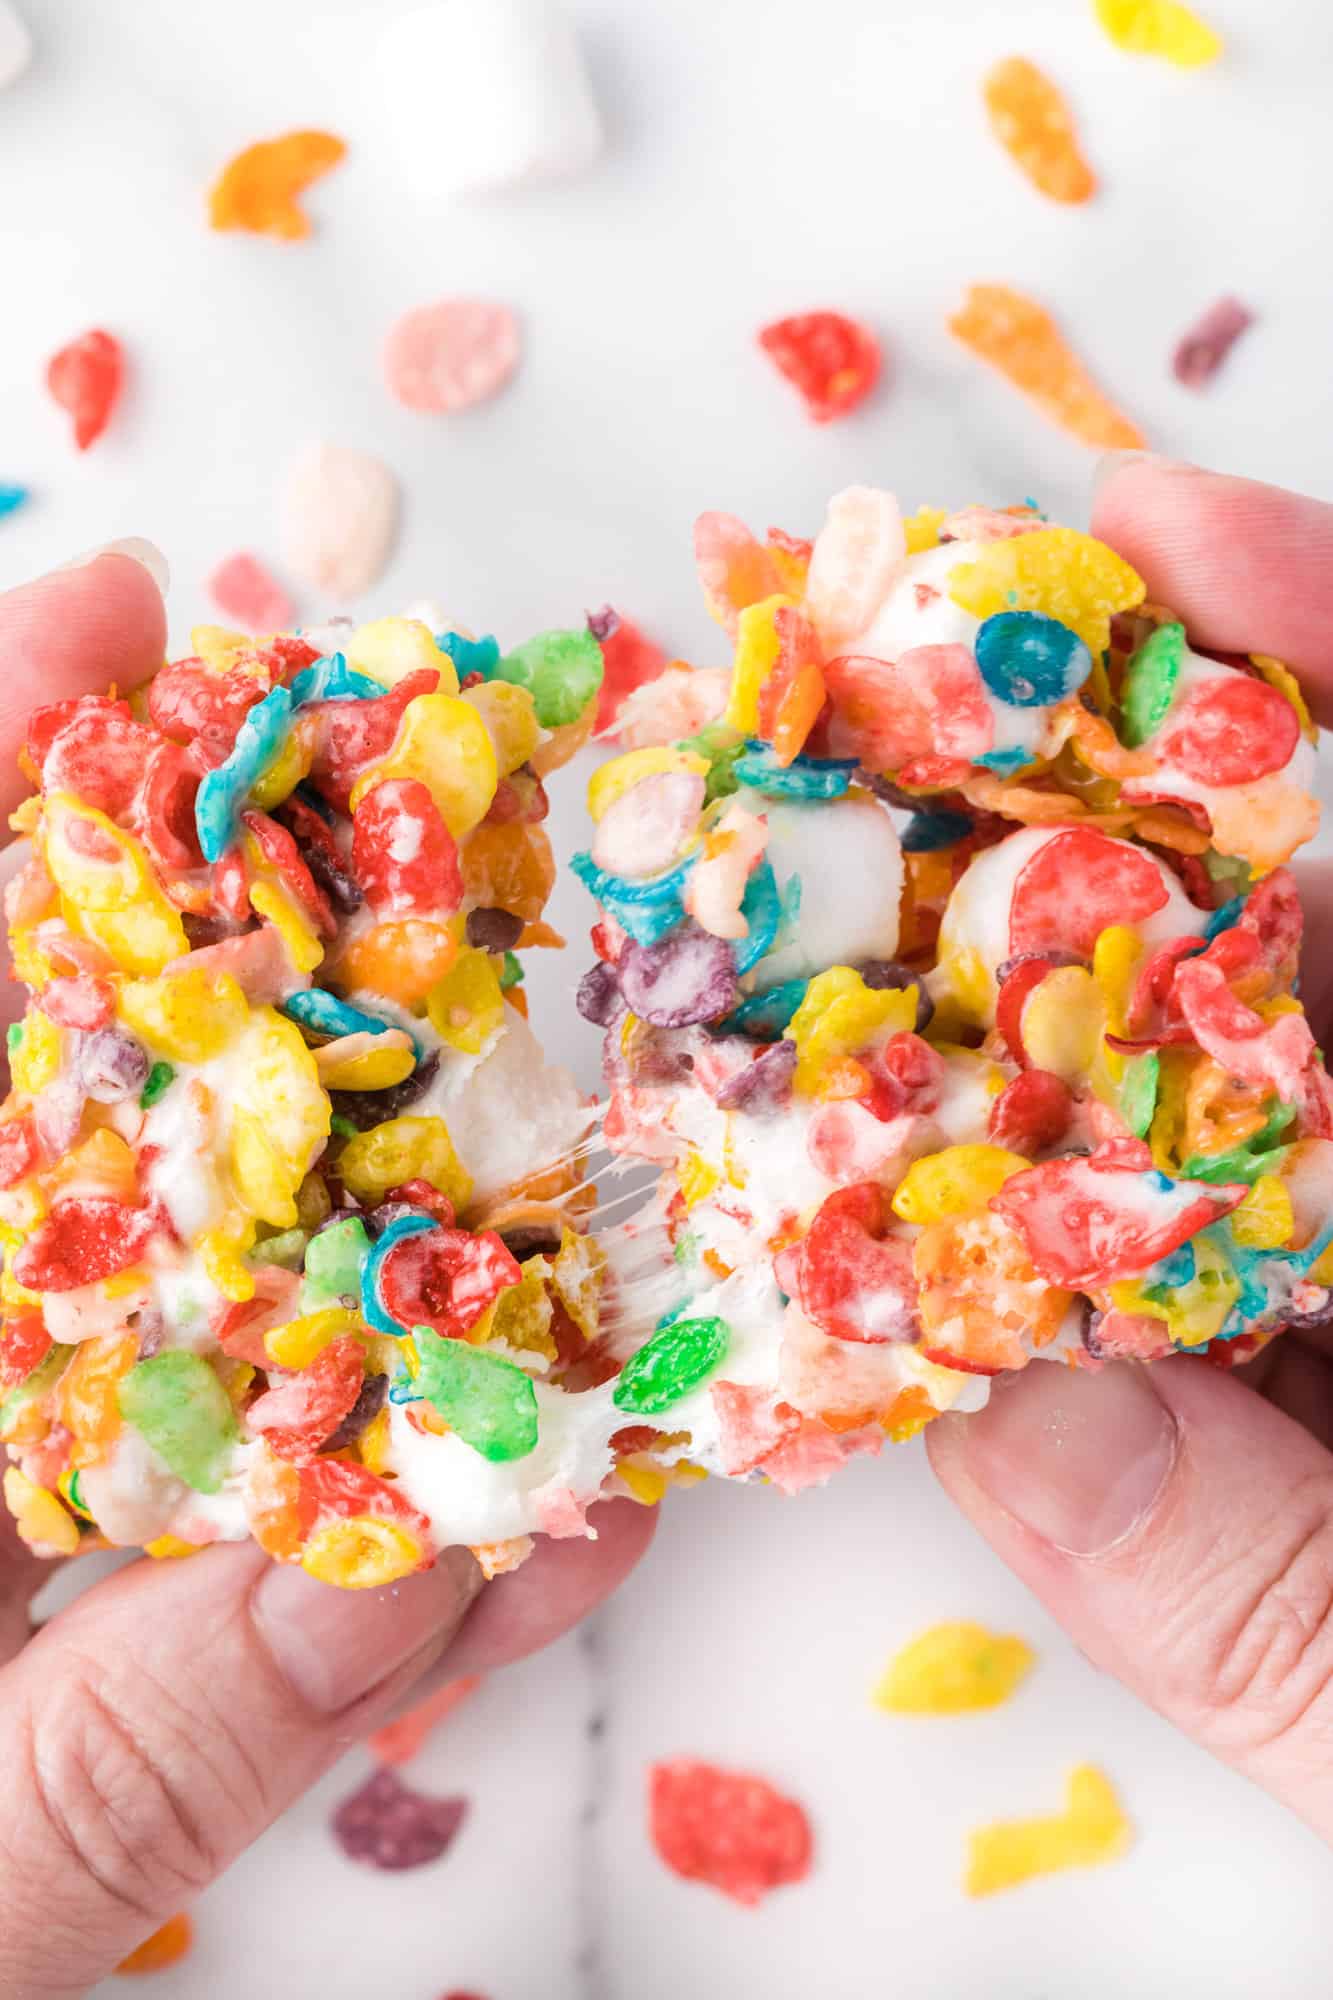 Two hands pulling apart a gooey Fruity Pebbles treat.